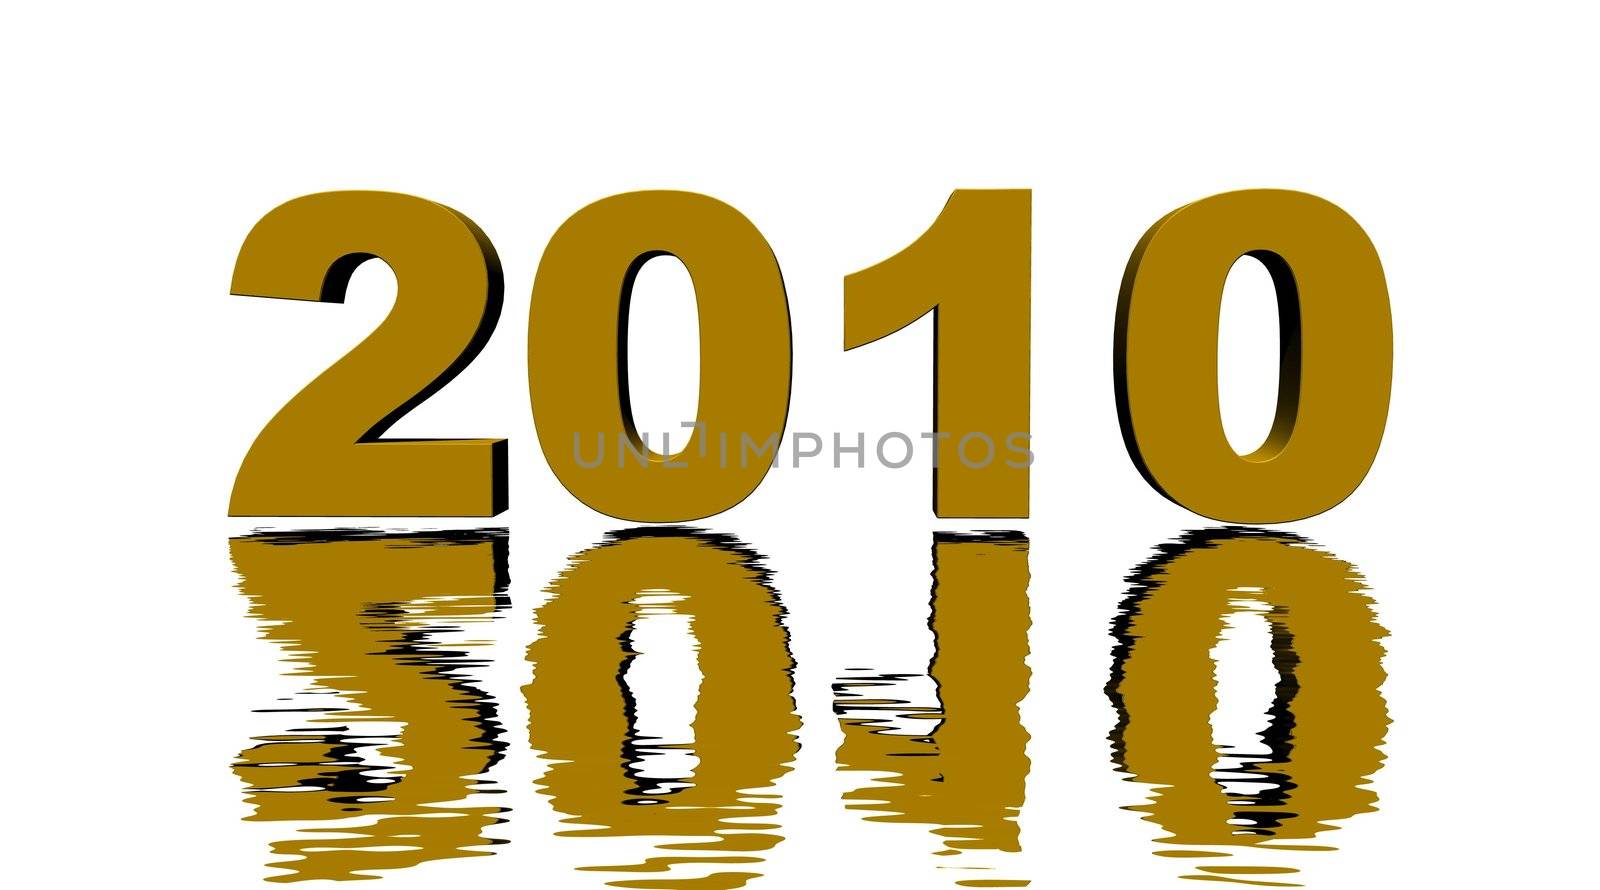 2010 written in metallic gold color and reflecting in white water with white background